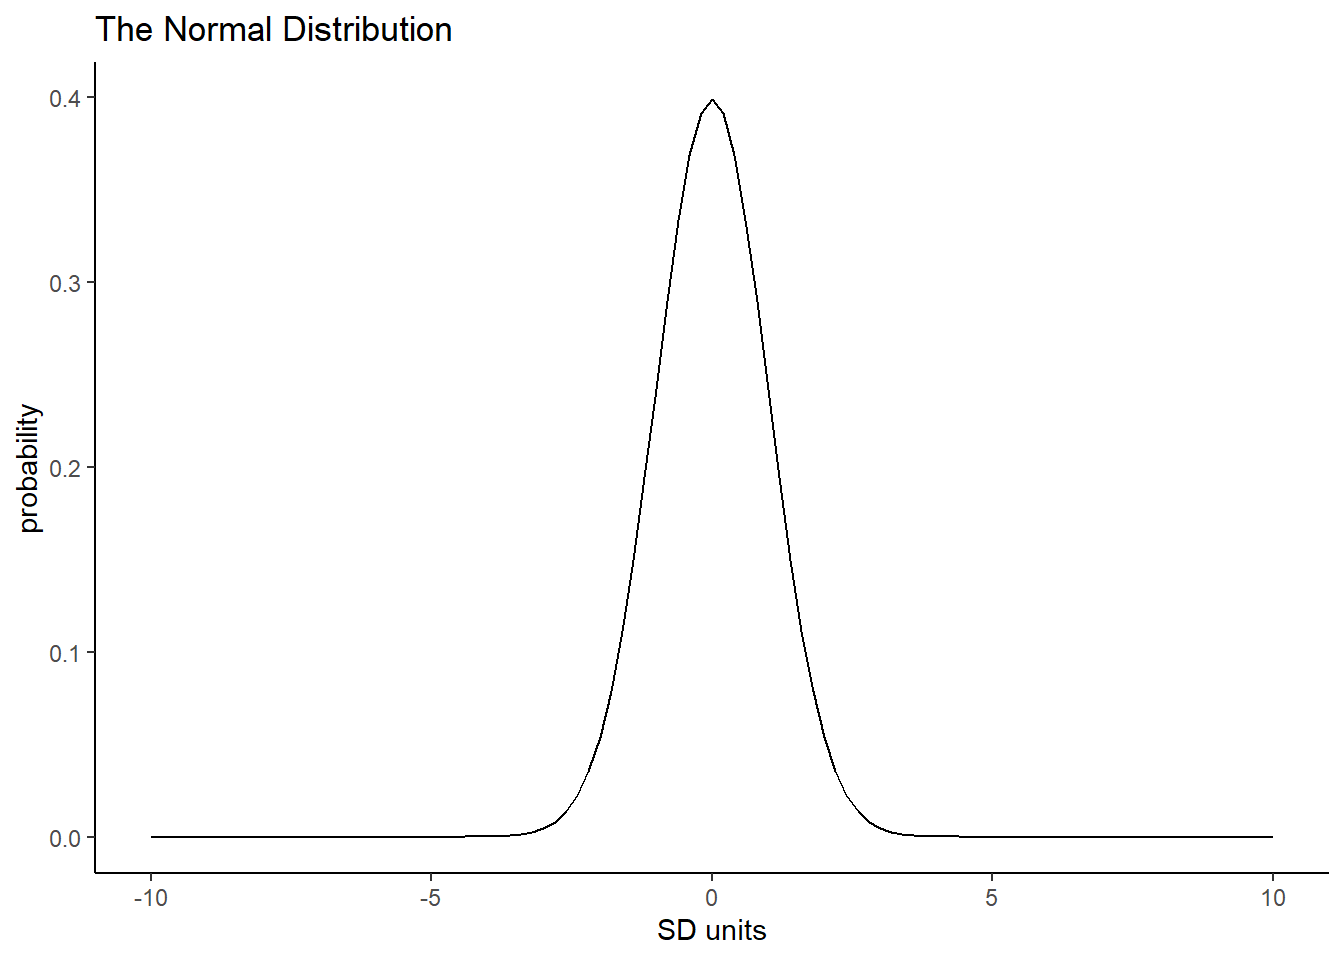 Normal Distribution shown on a scale of -10 to 10, with a mean = 0, sd = 1